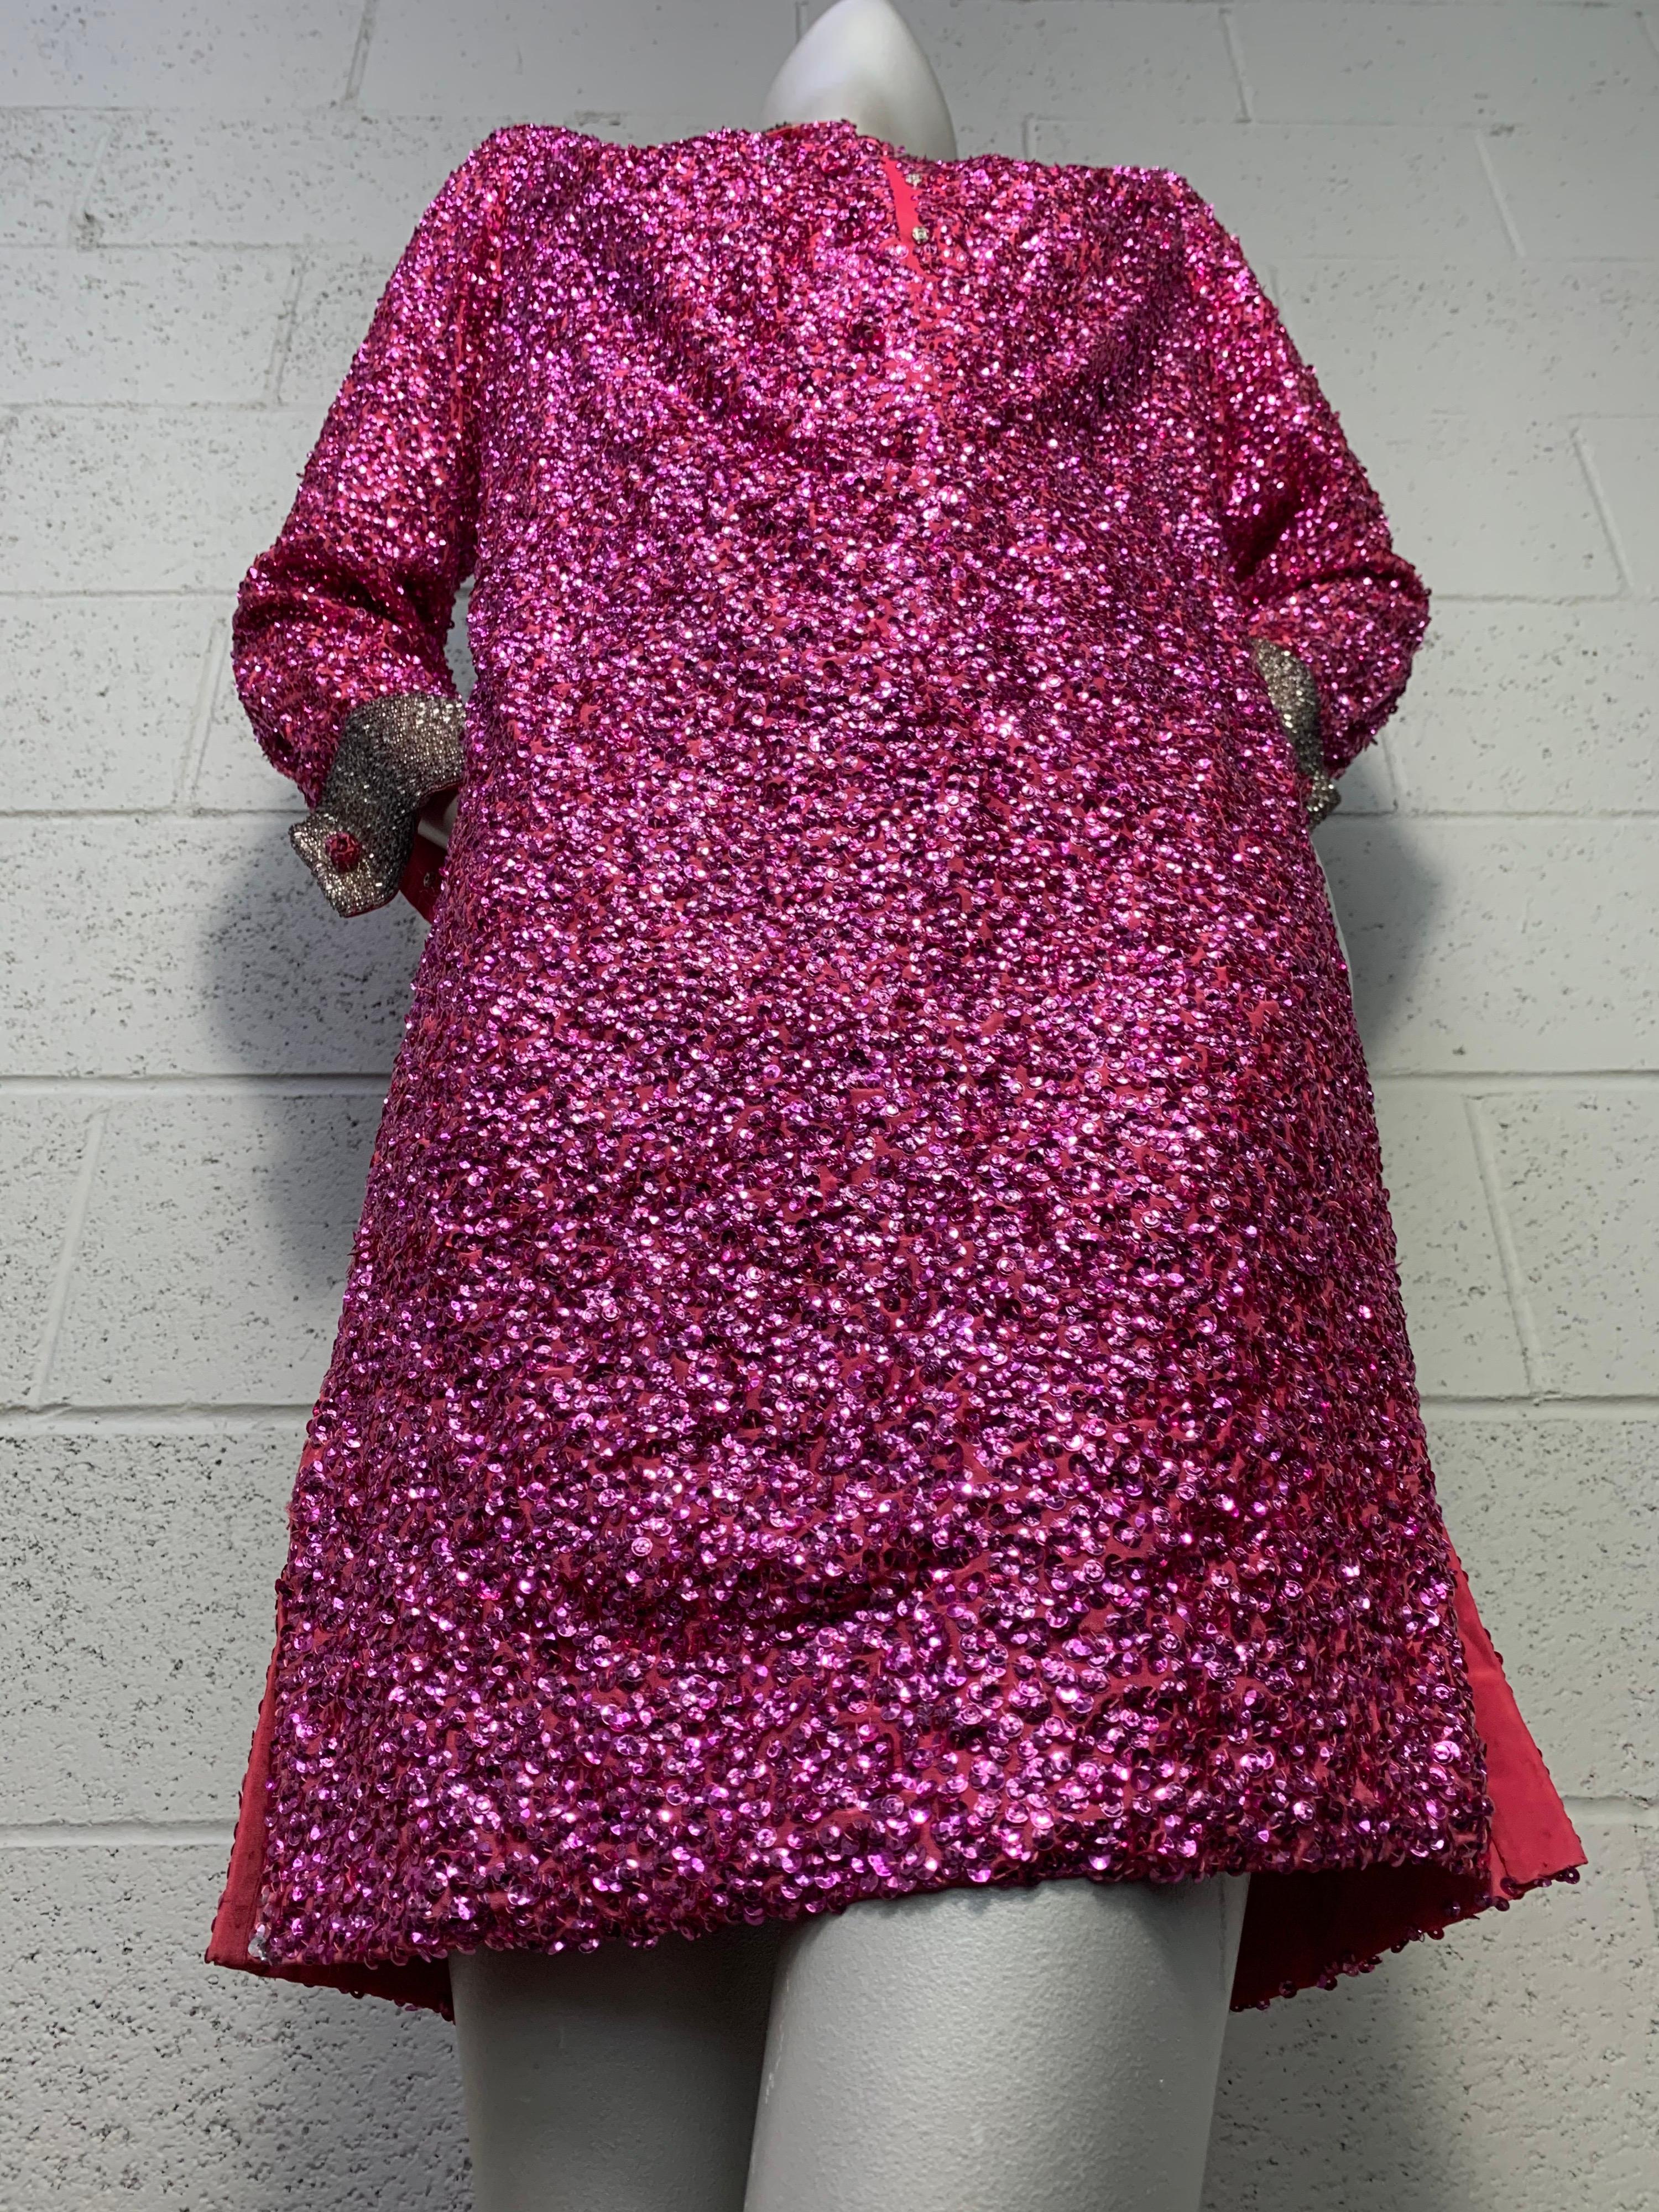 1960s Vivid Fuchsia Sequined Mod Mini Dress w/ Silver Beaded Collar and Cuffs For Sale 12